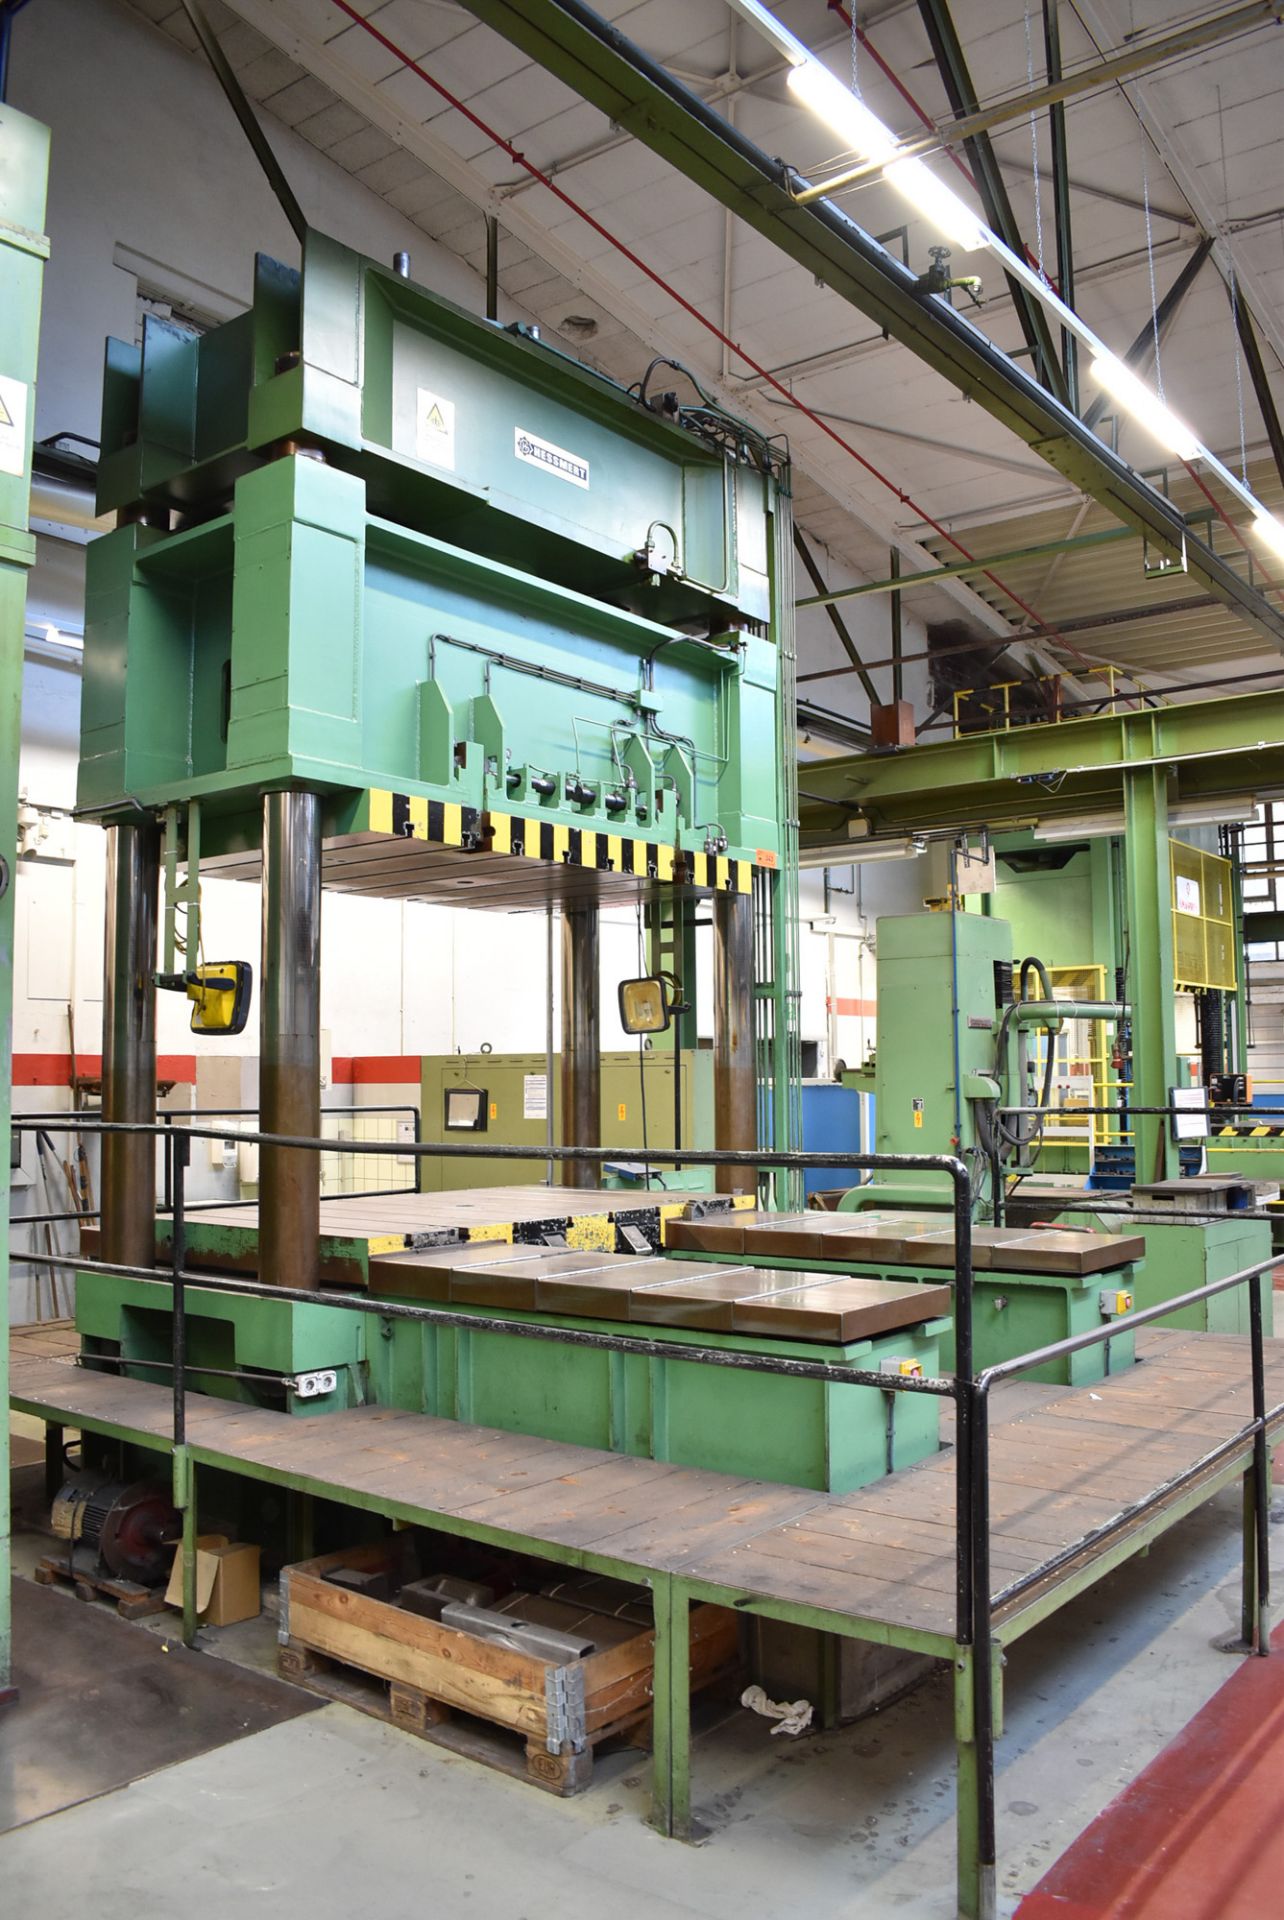 HESSMERT TS 300-25 300 TON CAPACITY FOUR POST HYDRAULIC DIE SPOTTING PRESS WITH CONVENTIONAL - Image 17 of 18